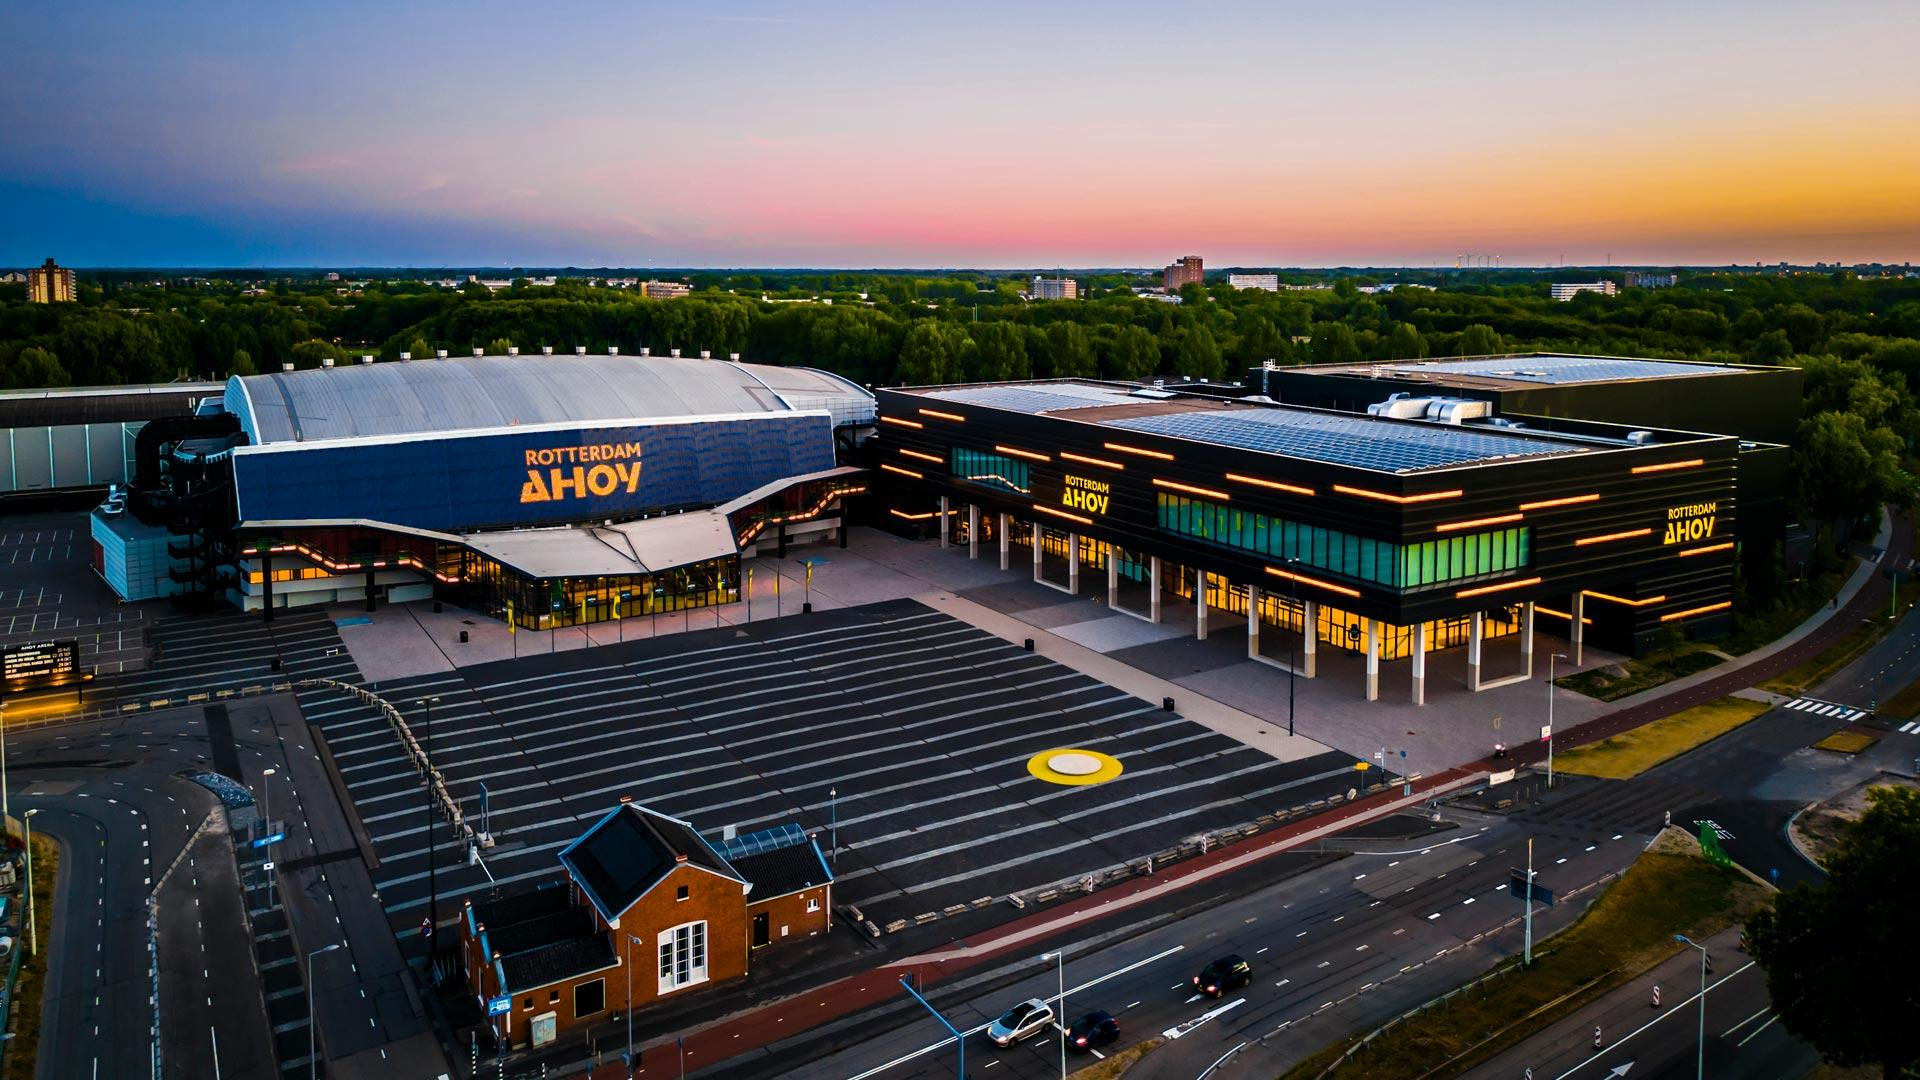 Rotterdam Ahoy will be a stunning venue for the European Para Championships ©Rotterdam Ahoy